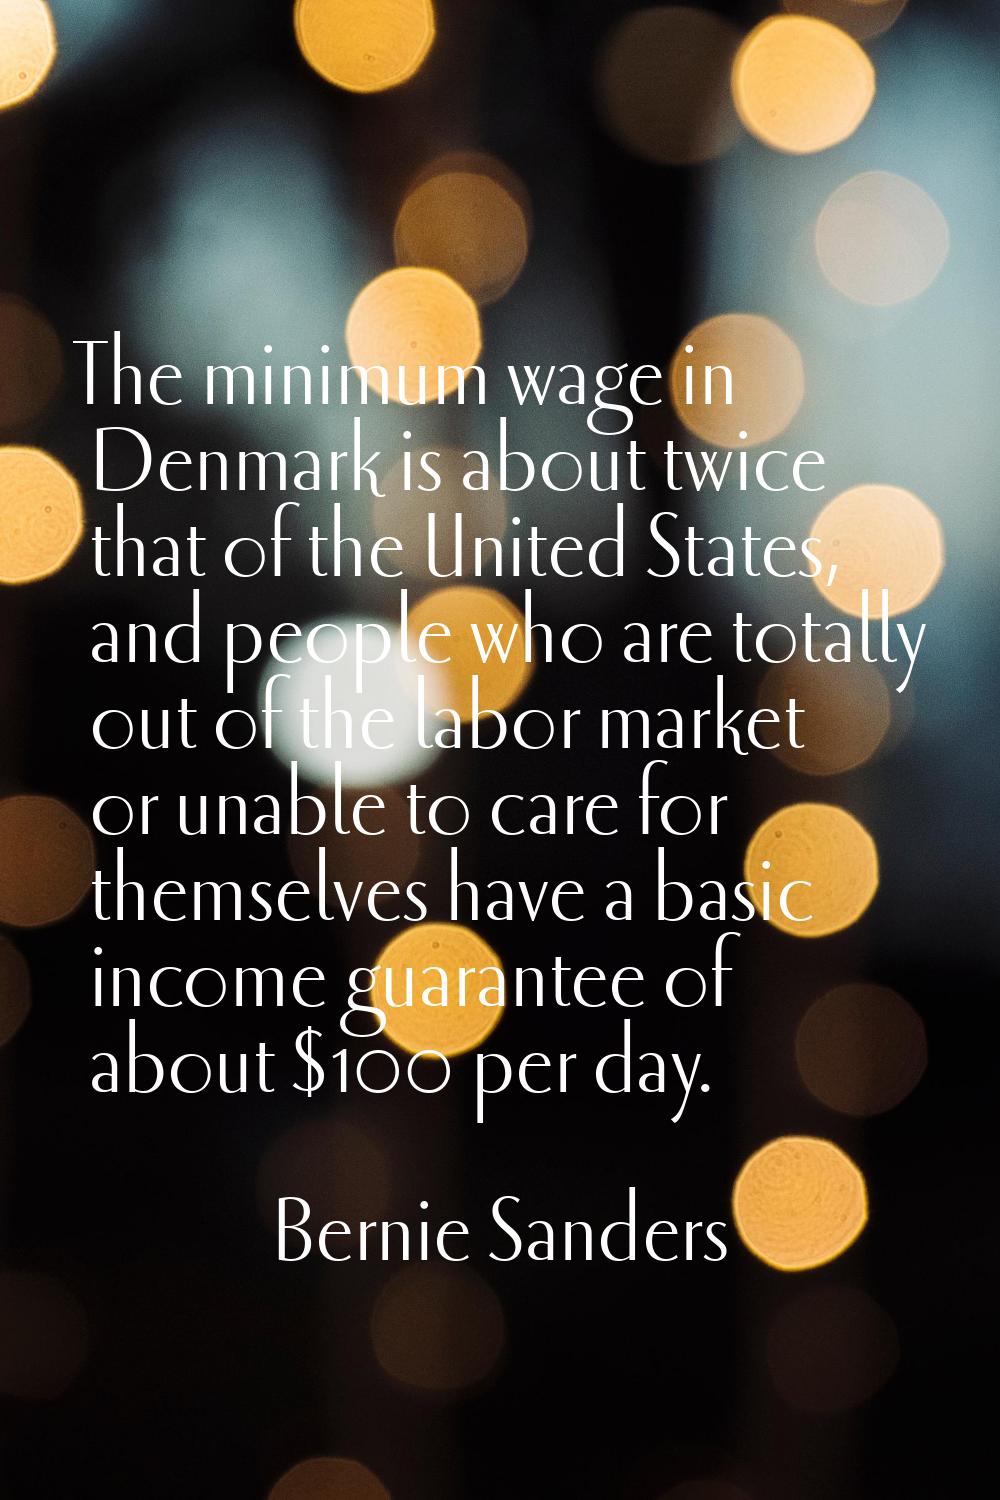 The minimum wage in Denmark is about twice that of the United States, and people who are totally ou